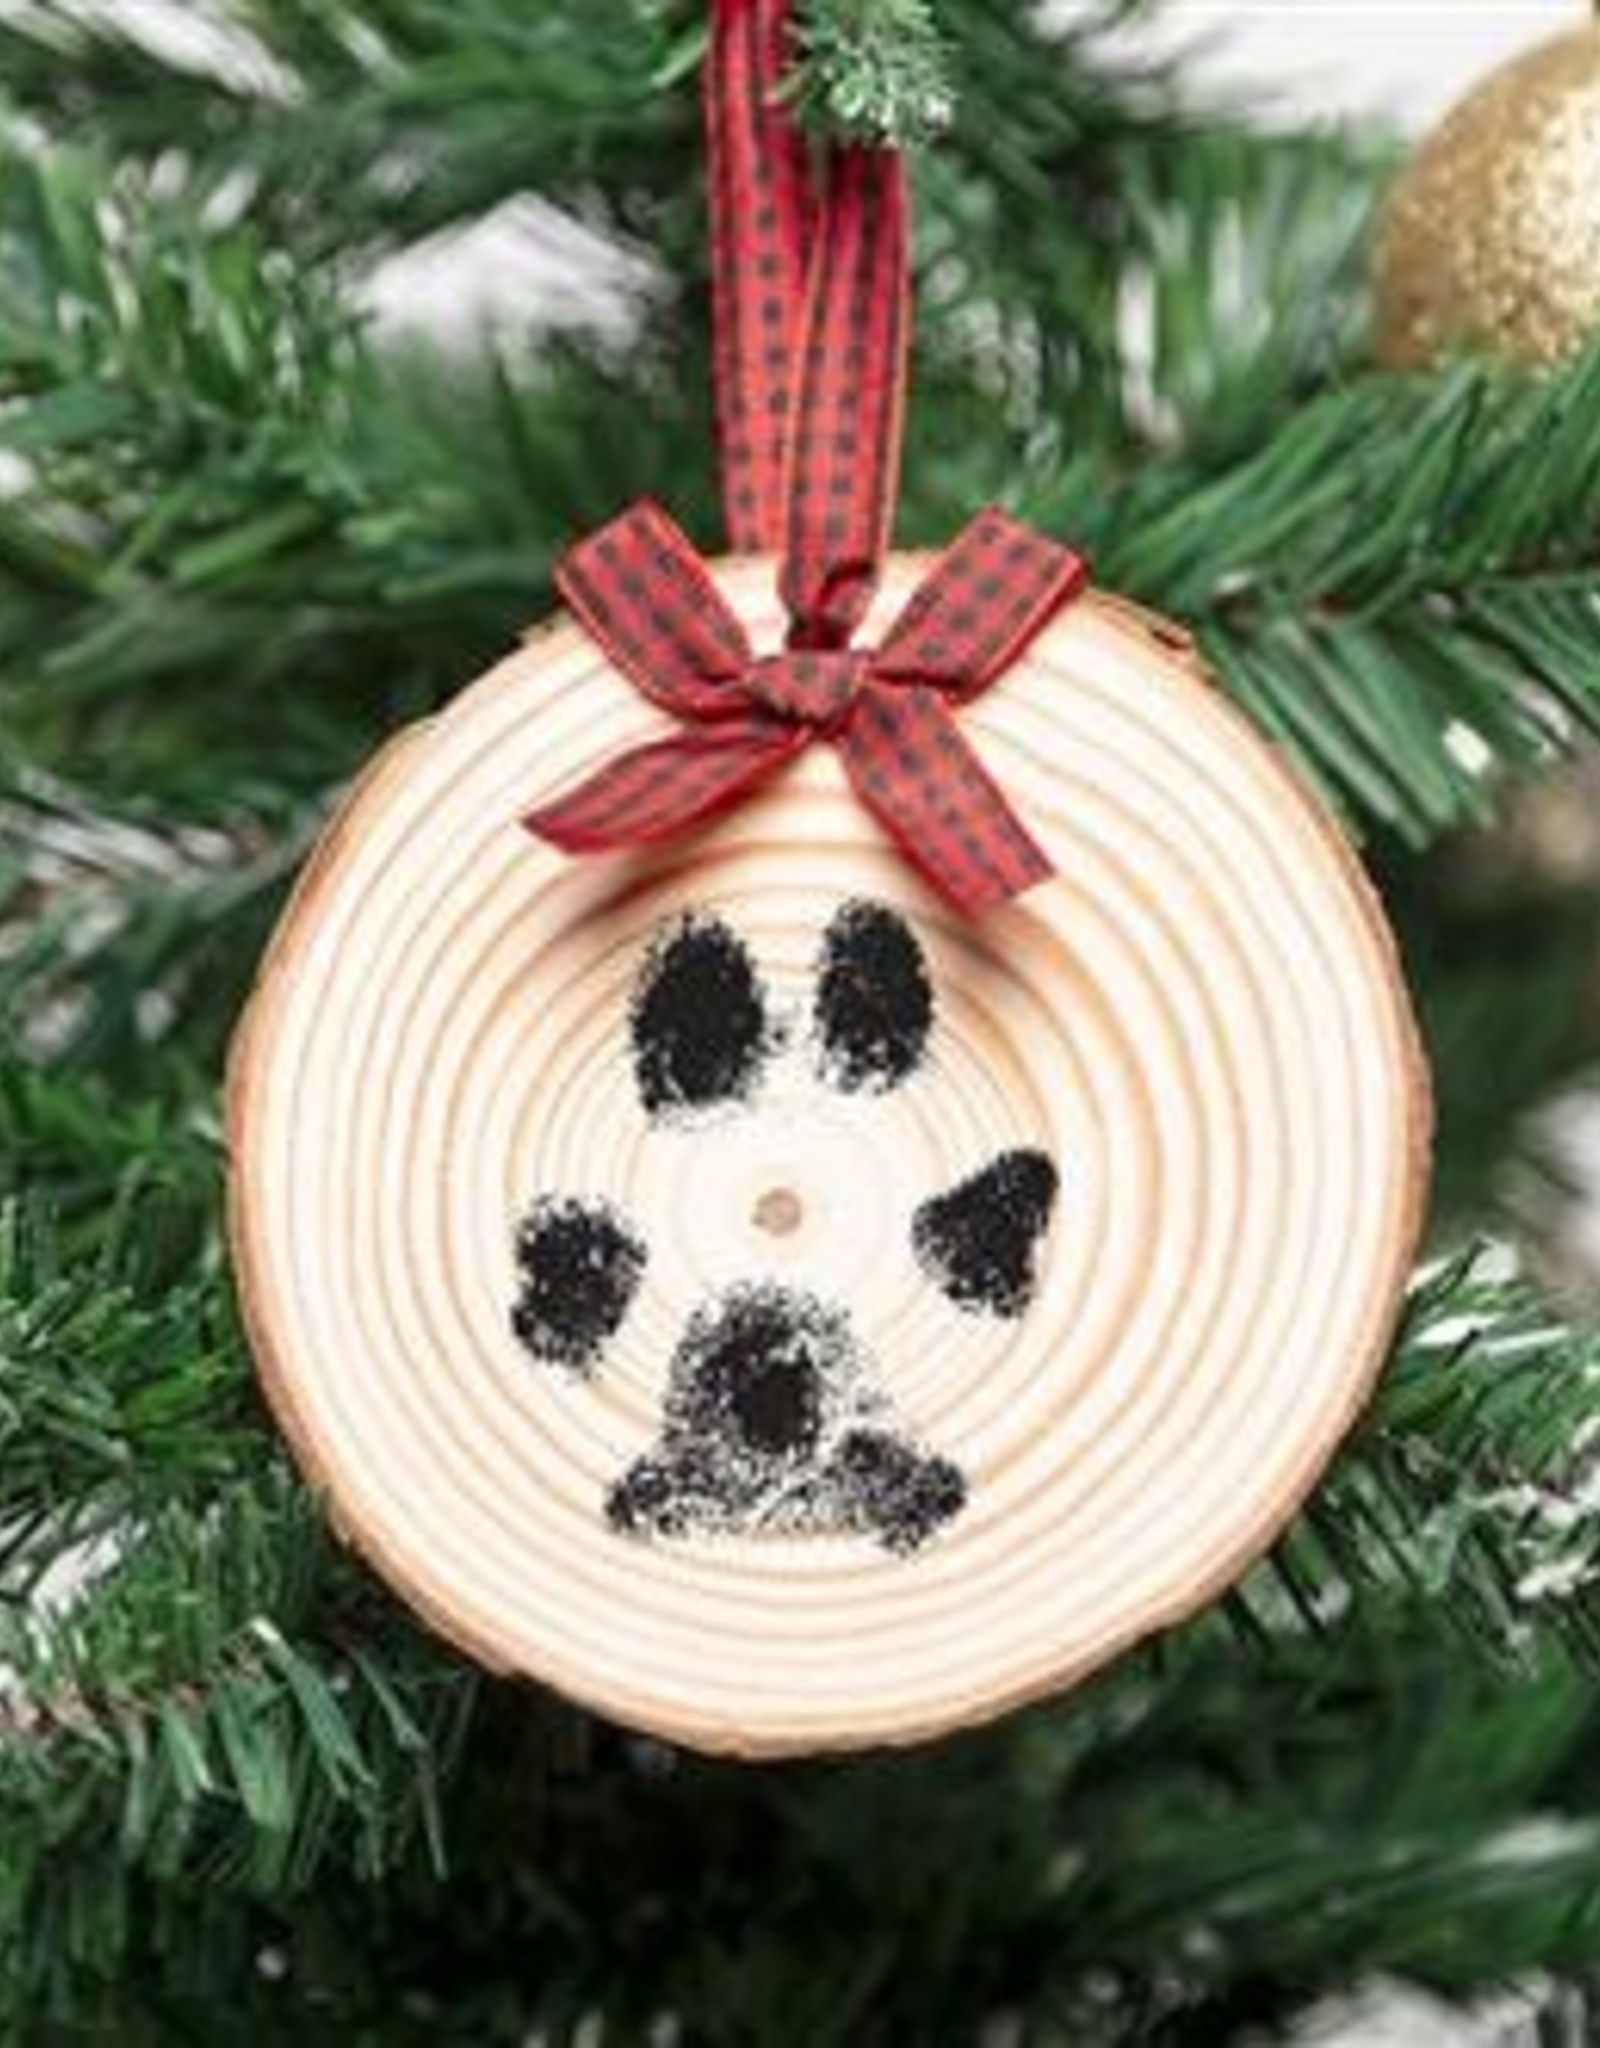 Holiday Wooden Paw Print Ornament